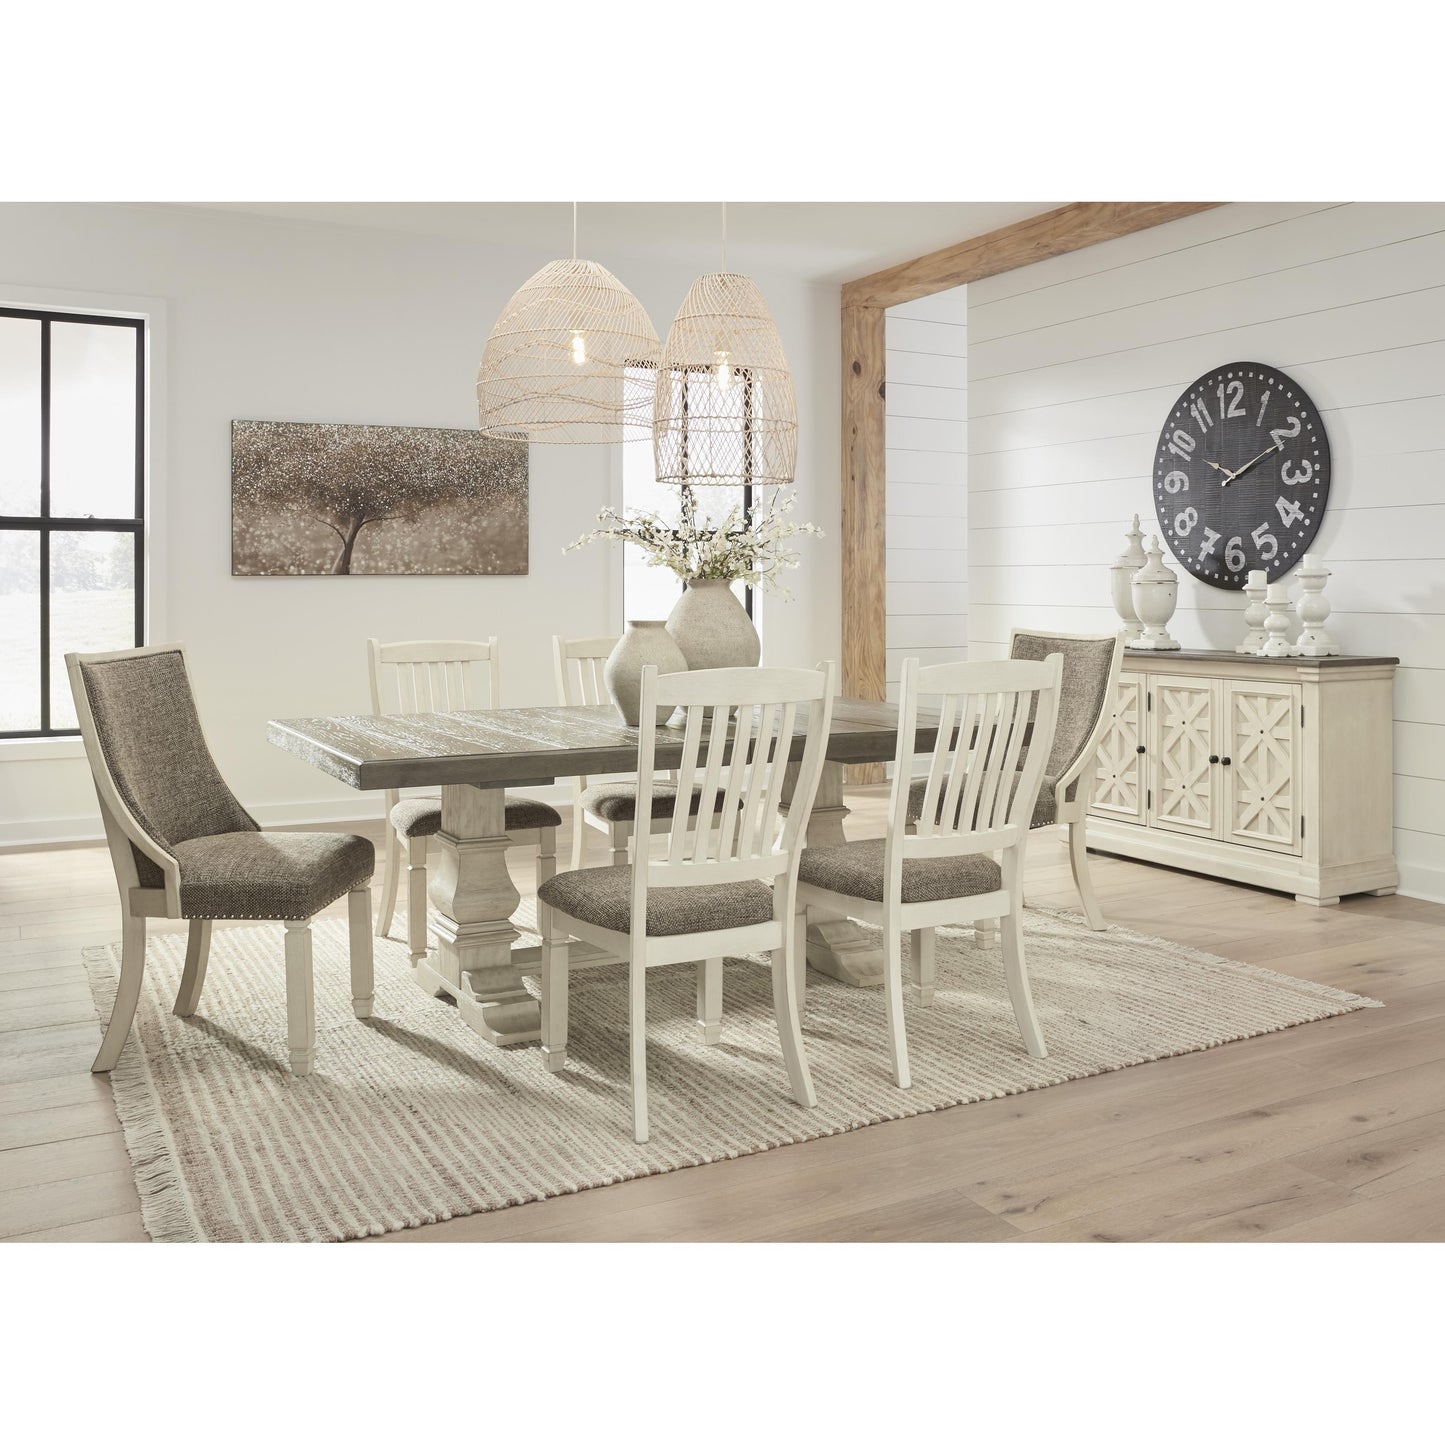 Signature Design by Ashley Bolanburg Dining Table with Trestle Base D647-55T/D647-55B IMAGE 7